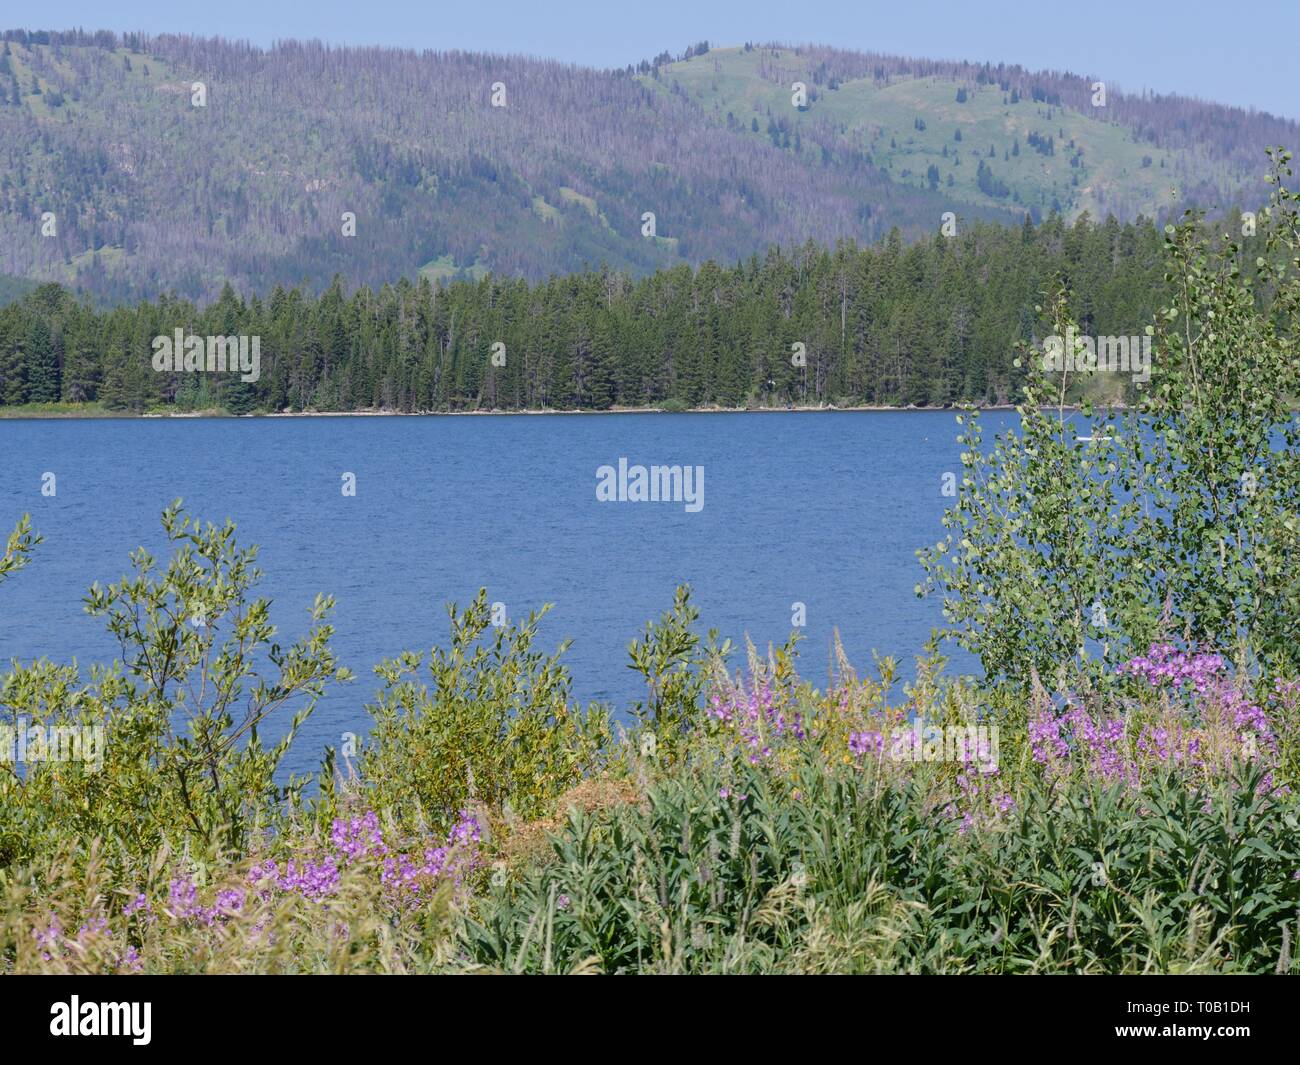 Lavender flowers line up the bank of Jackson Lake at the Grand Teton National Park in Wyoming. Stock Photo